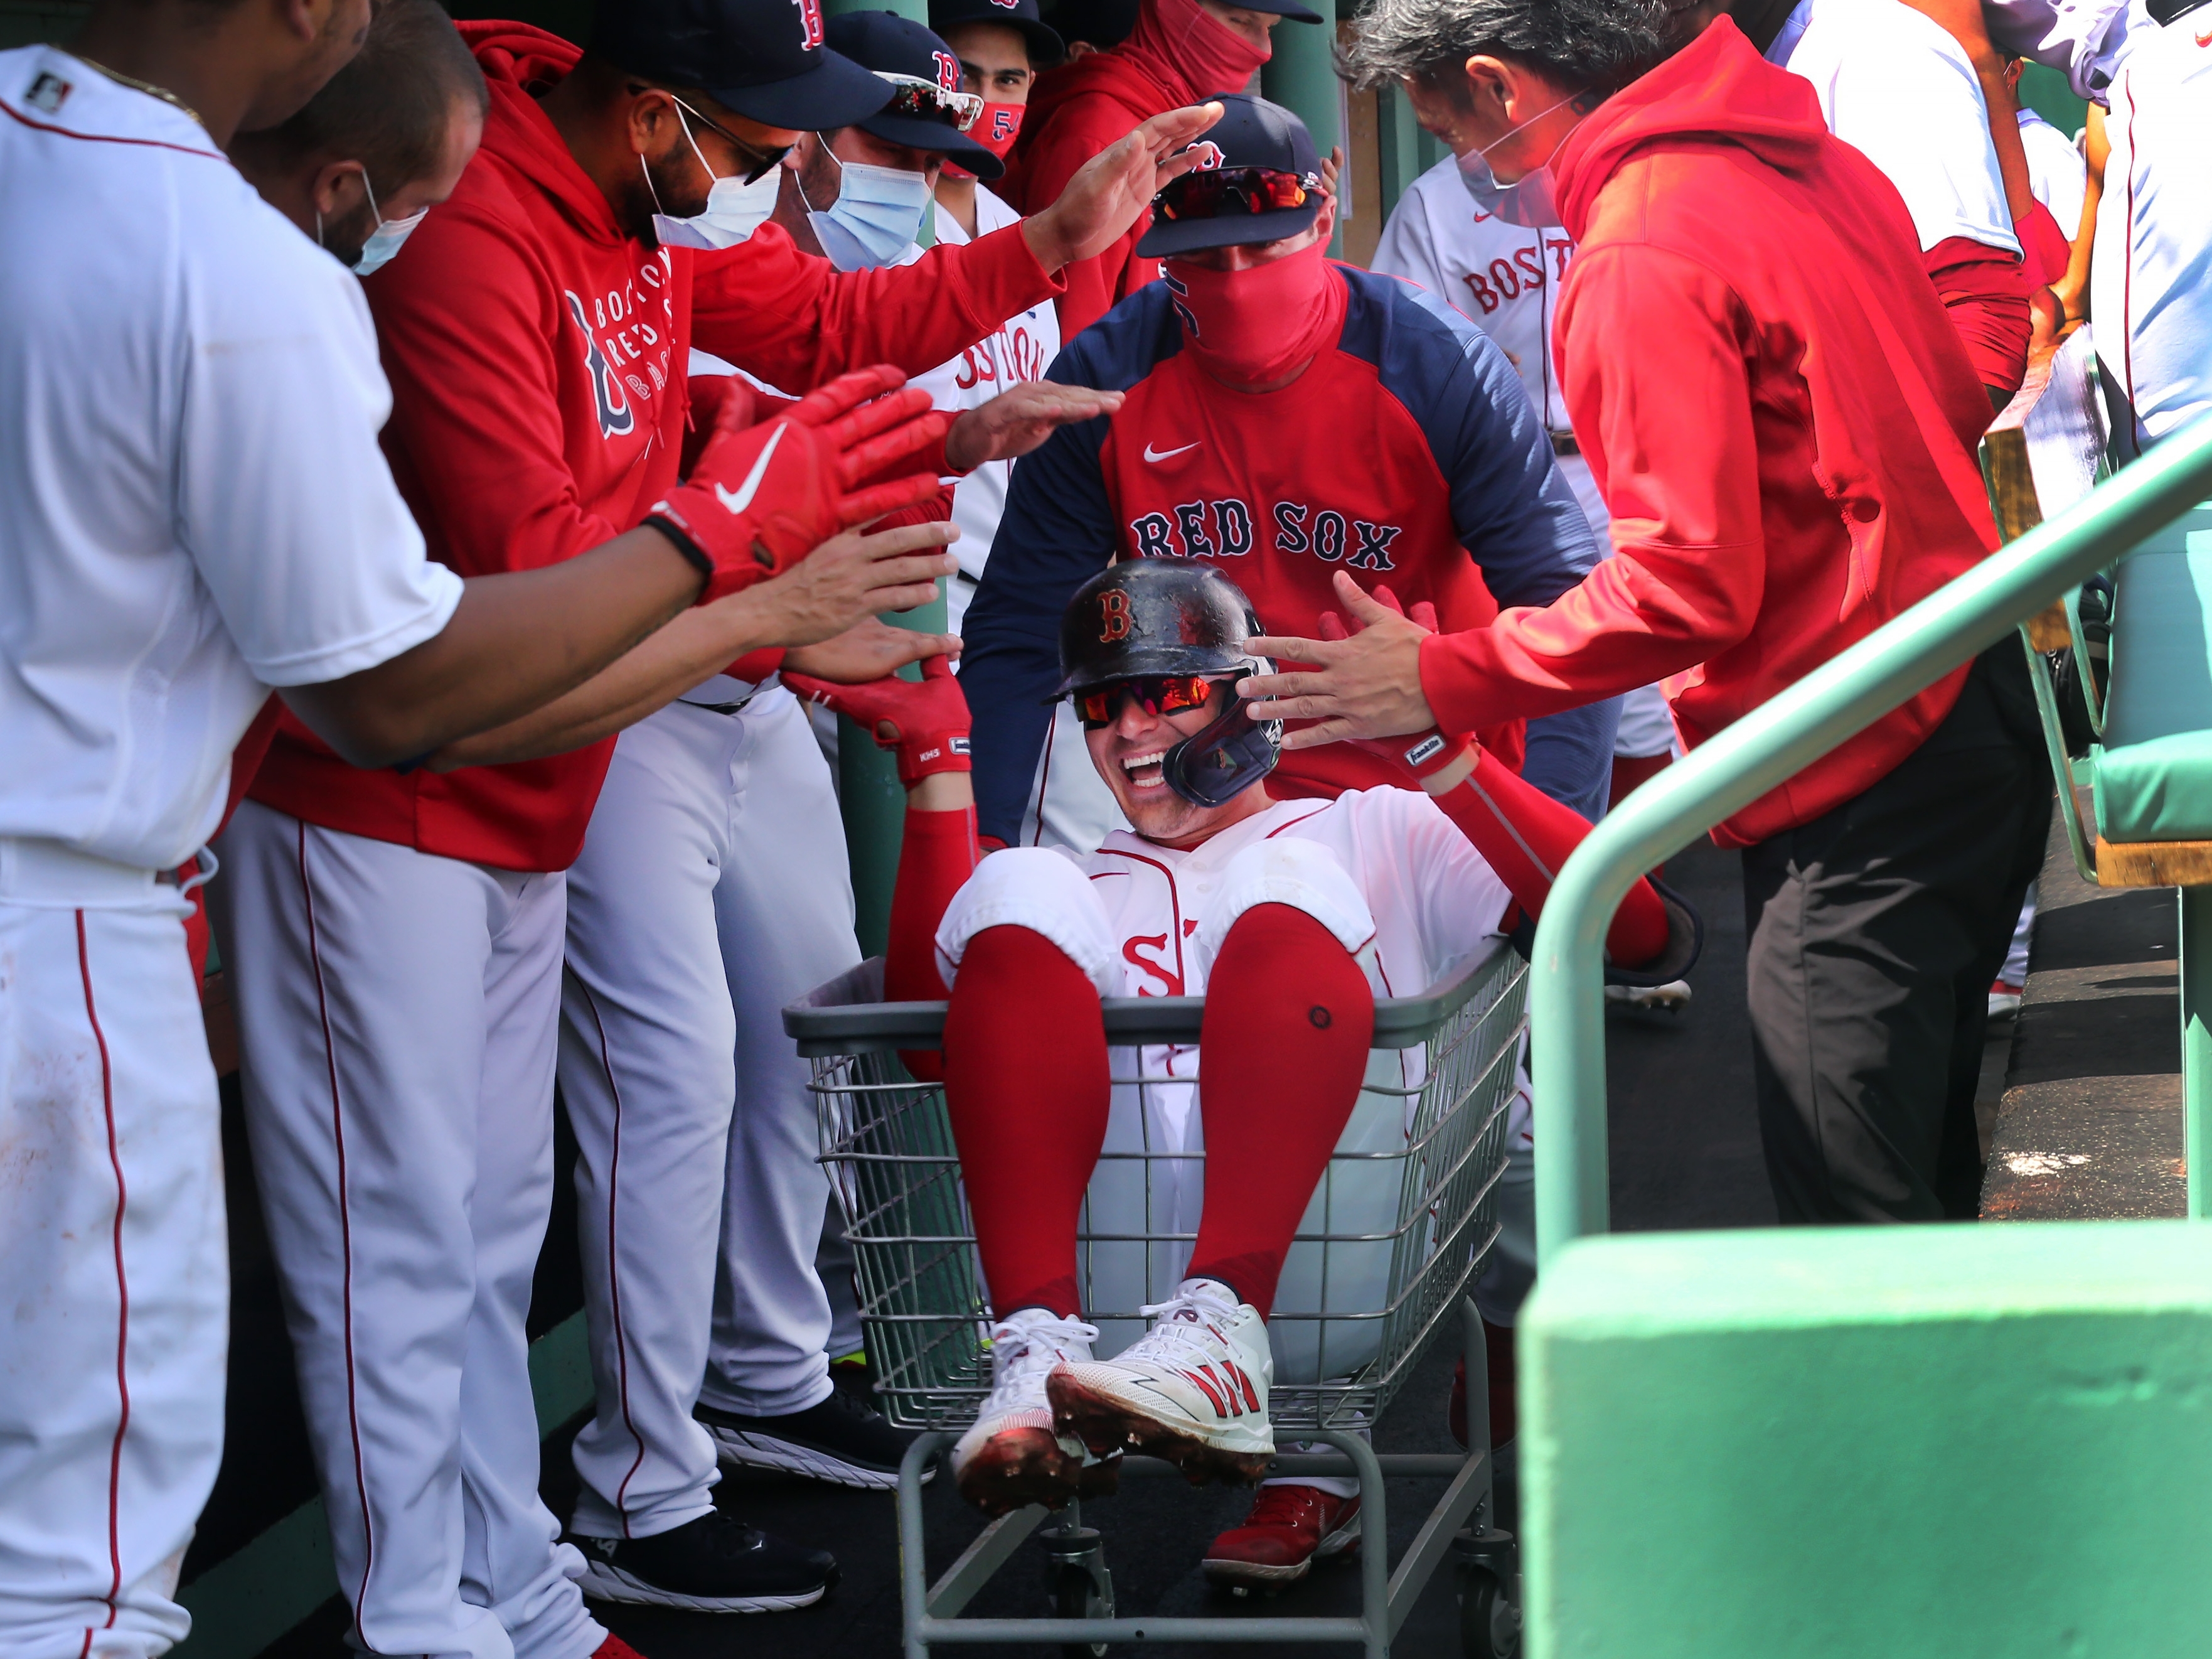 Alex Rodriguez wears Red Sox uniform and gets dunked with